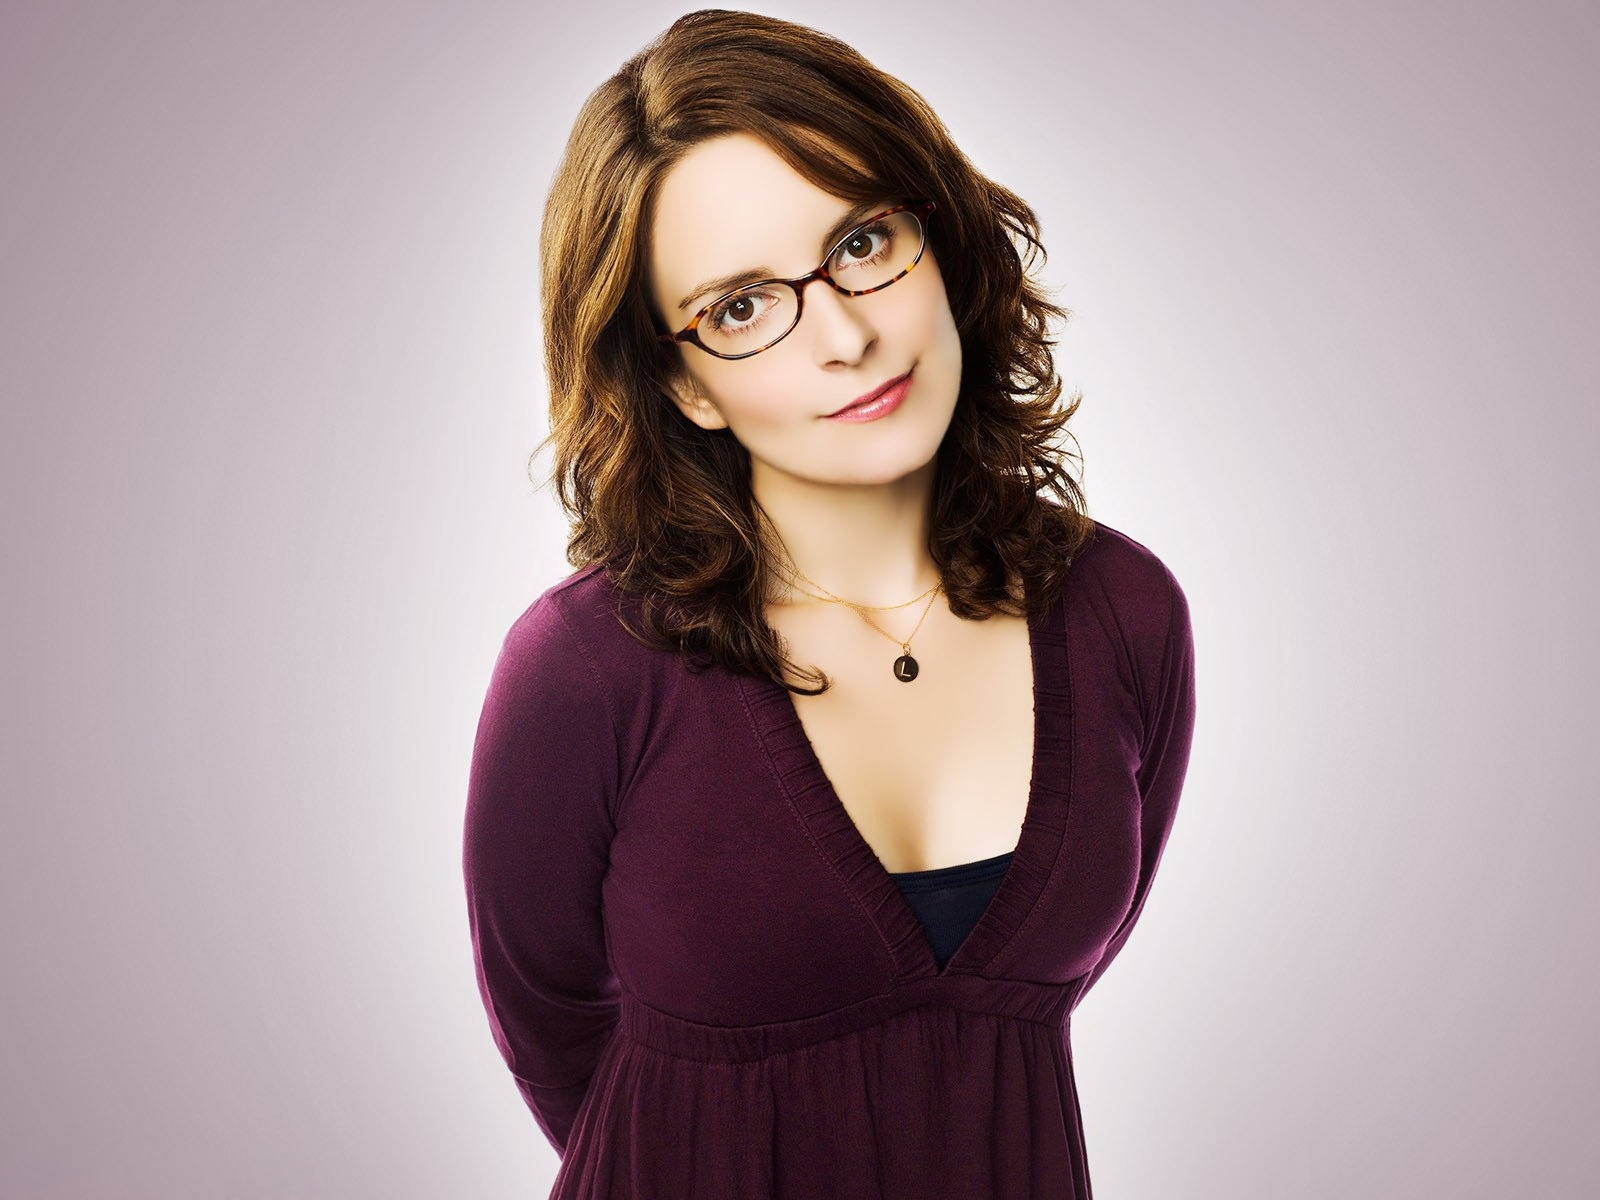 Tina Fey for 1600 x 1200 resolution